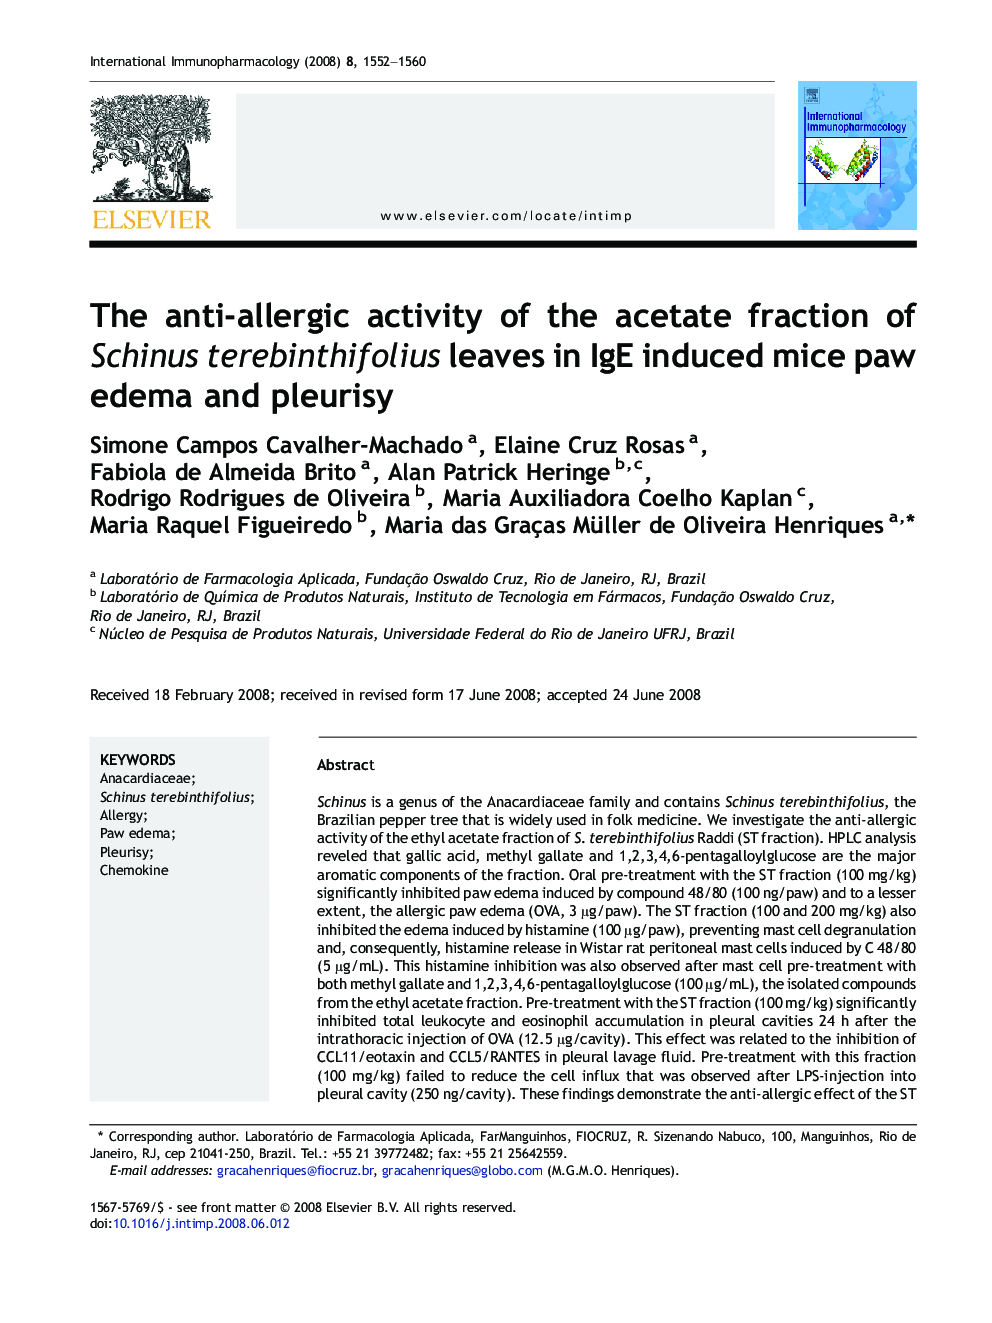 The anti-allergic activity of the acetate fraction of Schinus terebinthifolius leaves in IgE induced mice paw edema and pleurisy